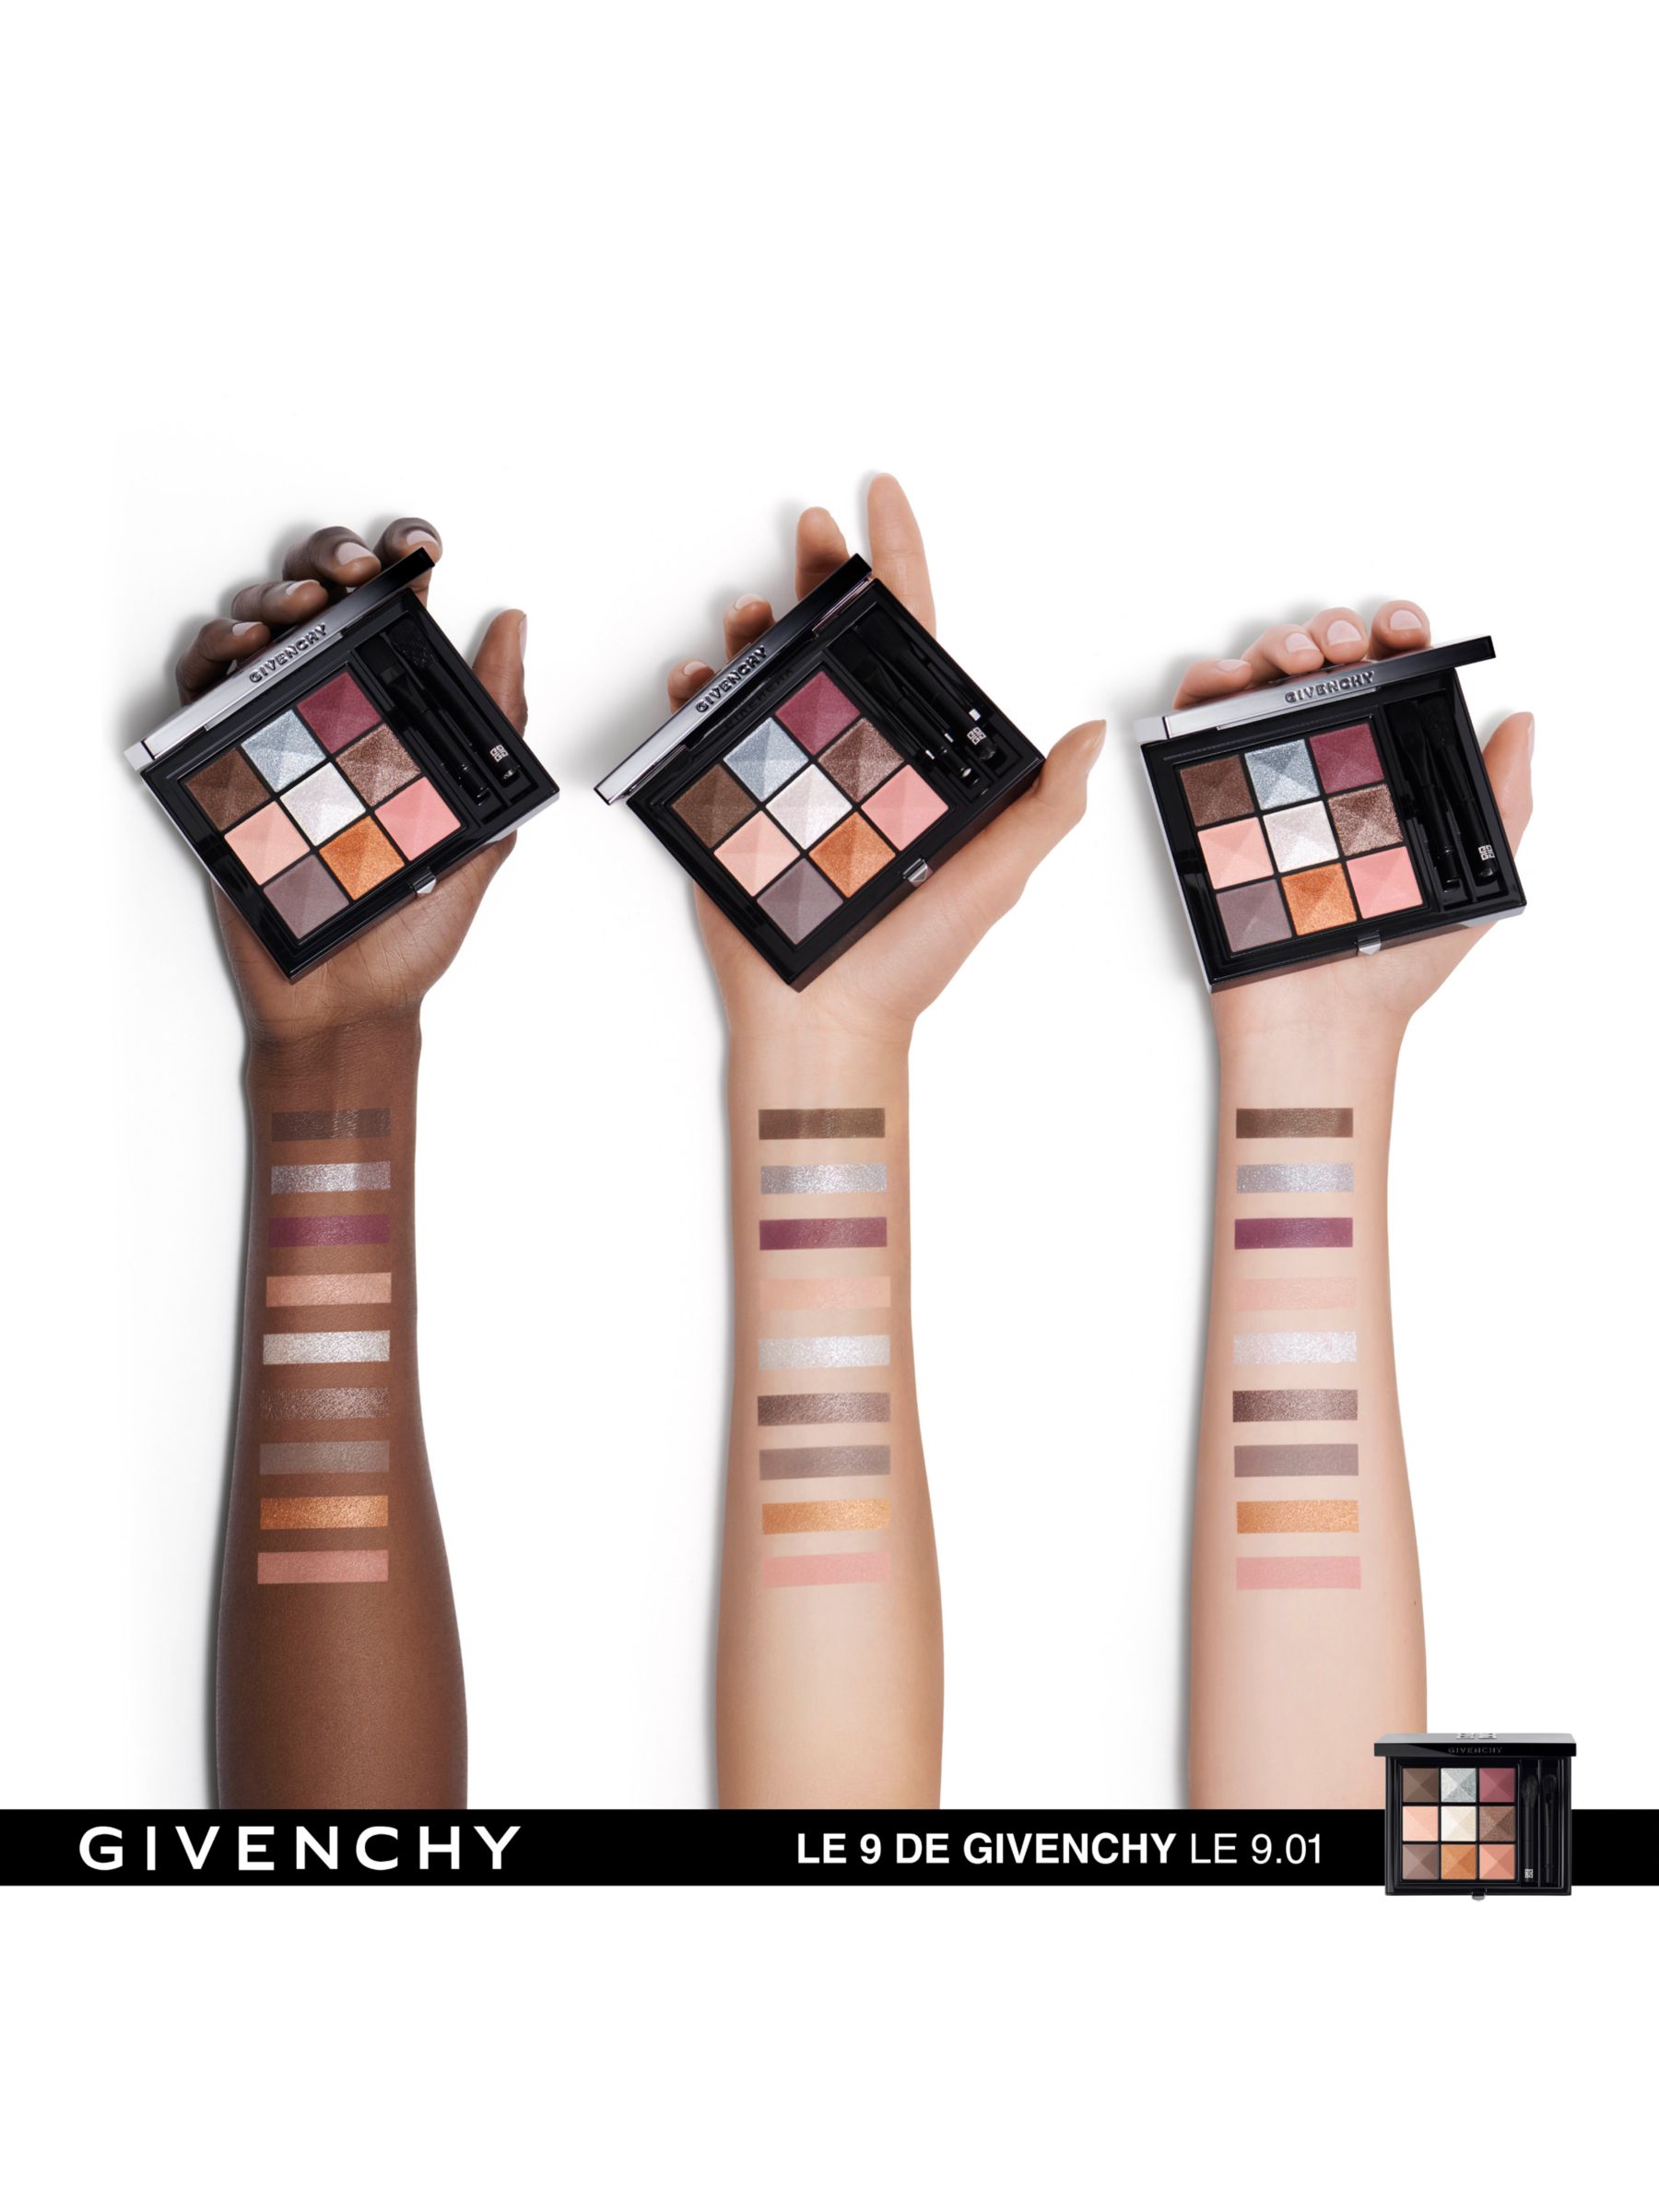 Givenchy Le 9 de Givenchy Multi-Finish Eyeshadow Palette, 9.01 2